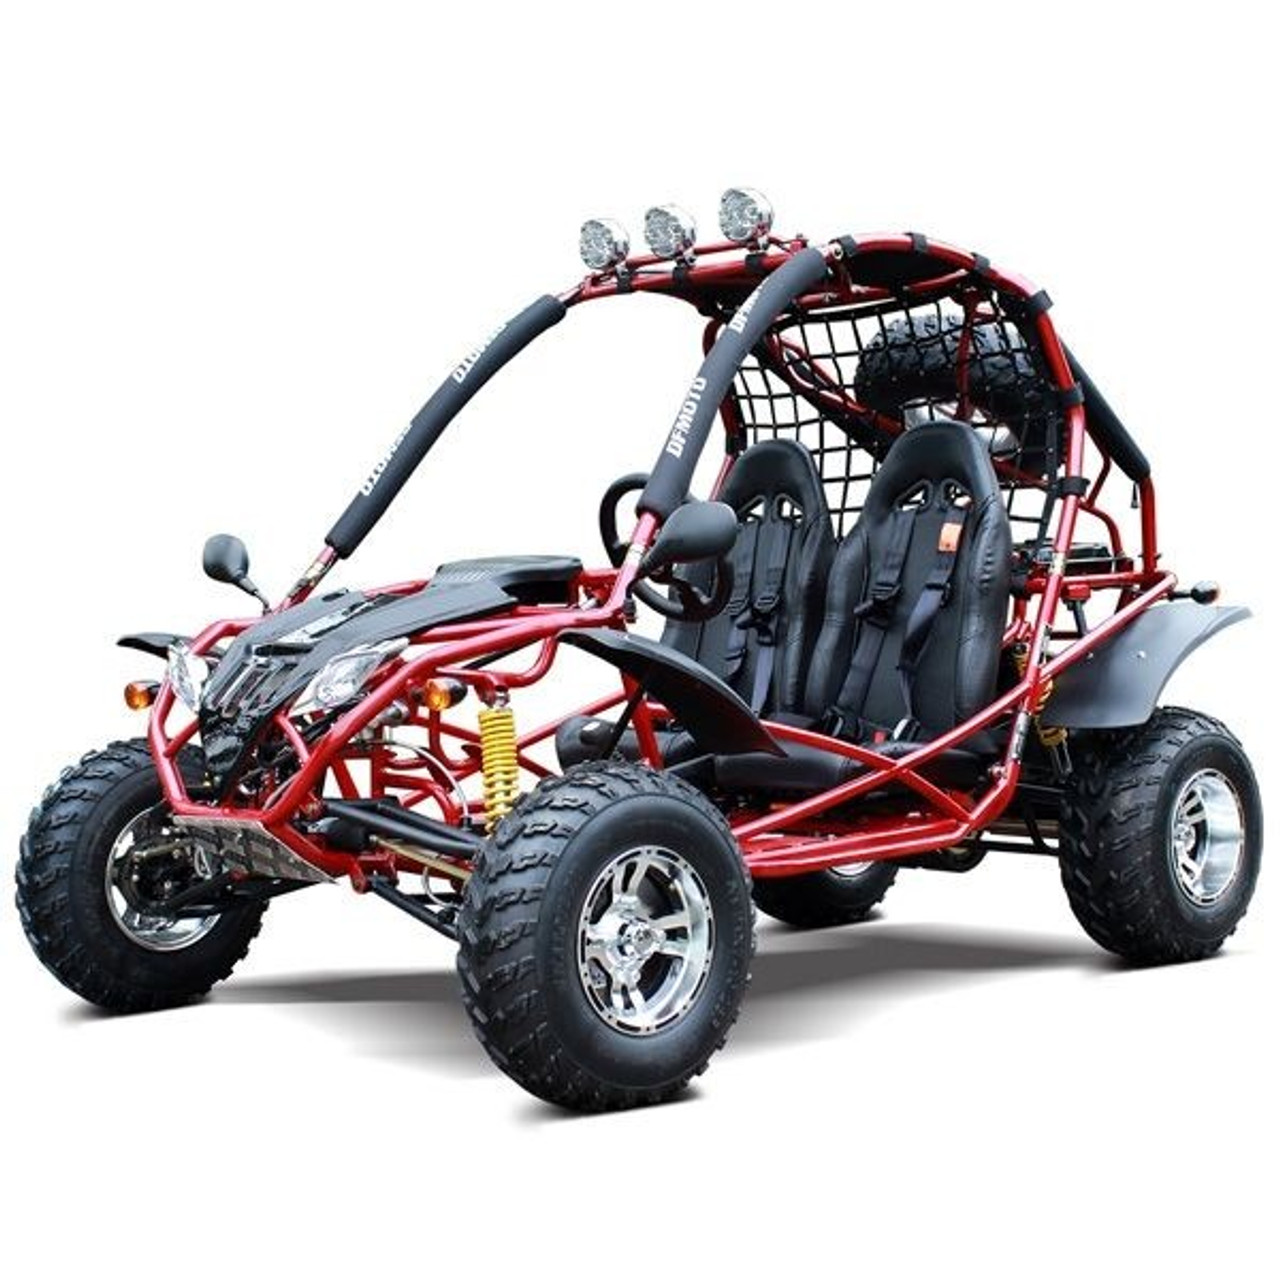 Dongfang 200cc (DF200GKA) Adult Go Kart, Deluxe DF GKA With Auto Transmission, Large aluminum wheel